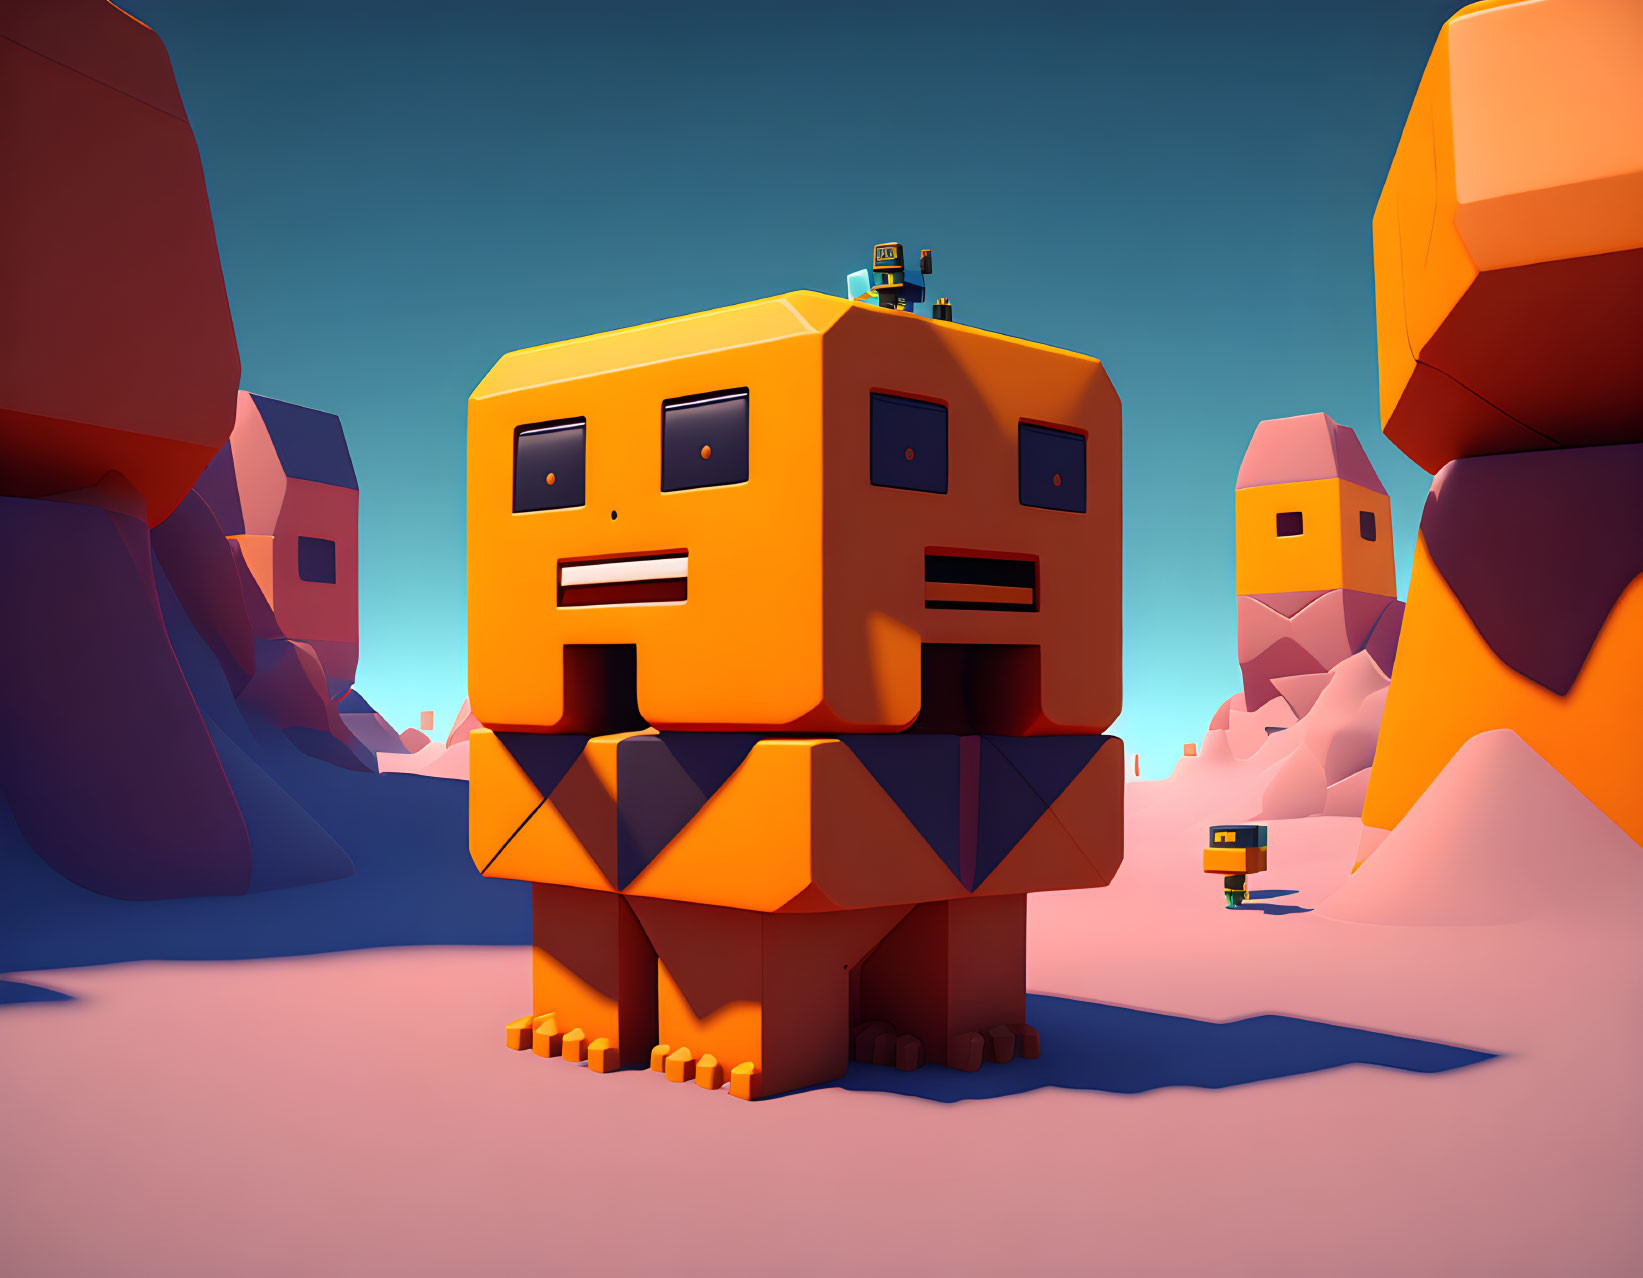 Colorful 3D robot in desert landscape with cube-like body